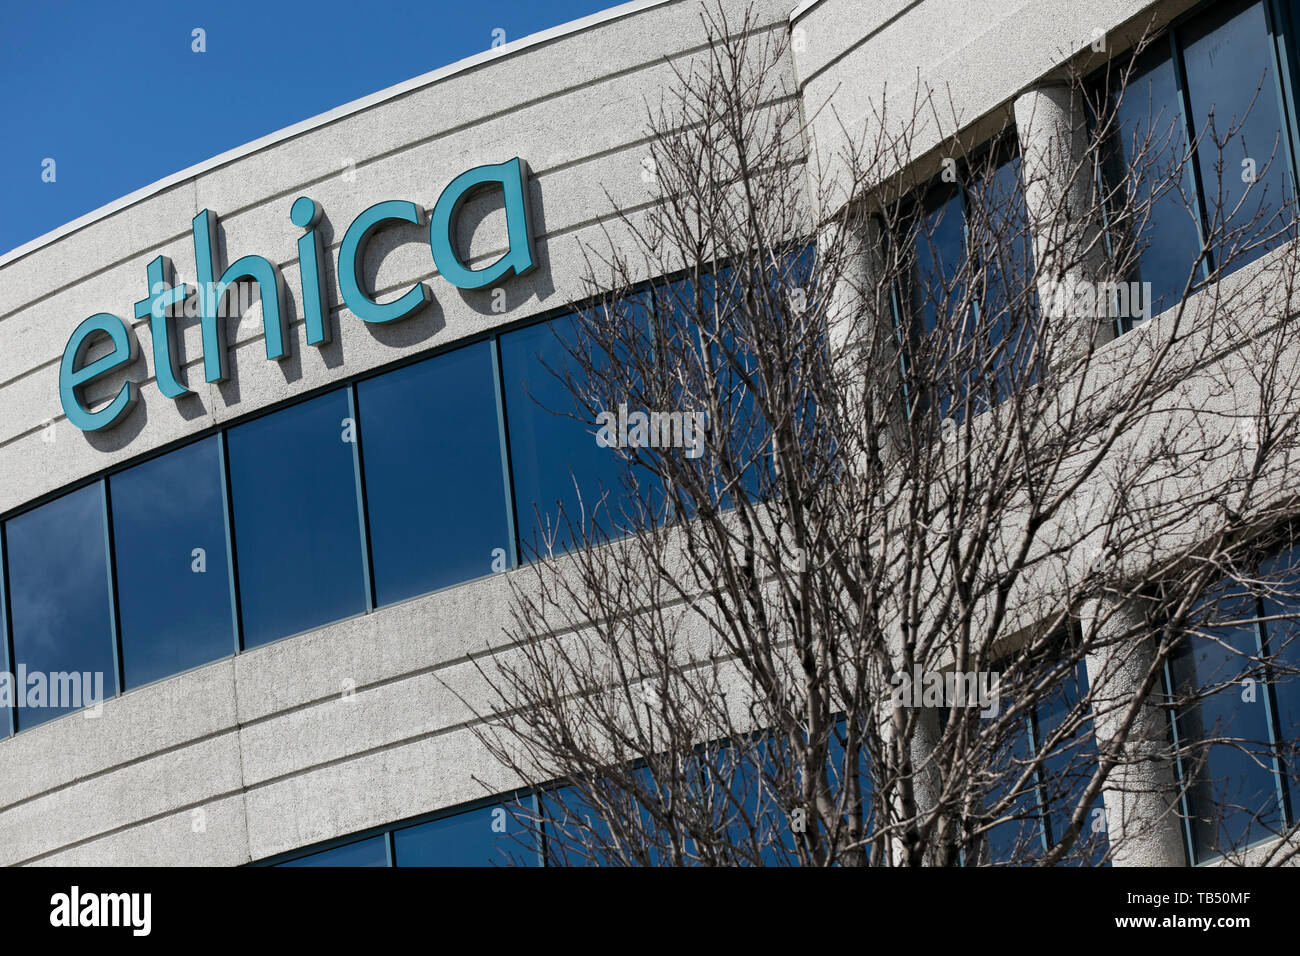 A logo sign outside of a facility occupied by Ethica Clinical Research in Saint-Laurent, Quebec, Canada, on April 21, 2019. Stock Photo